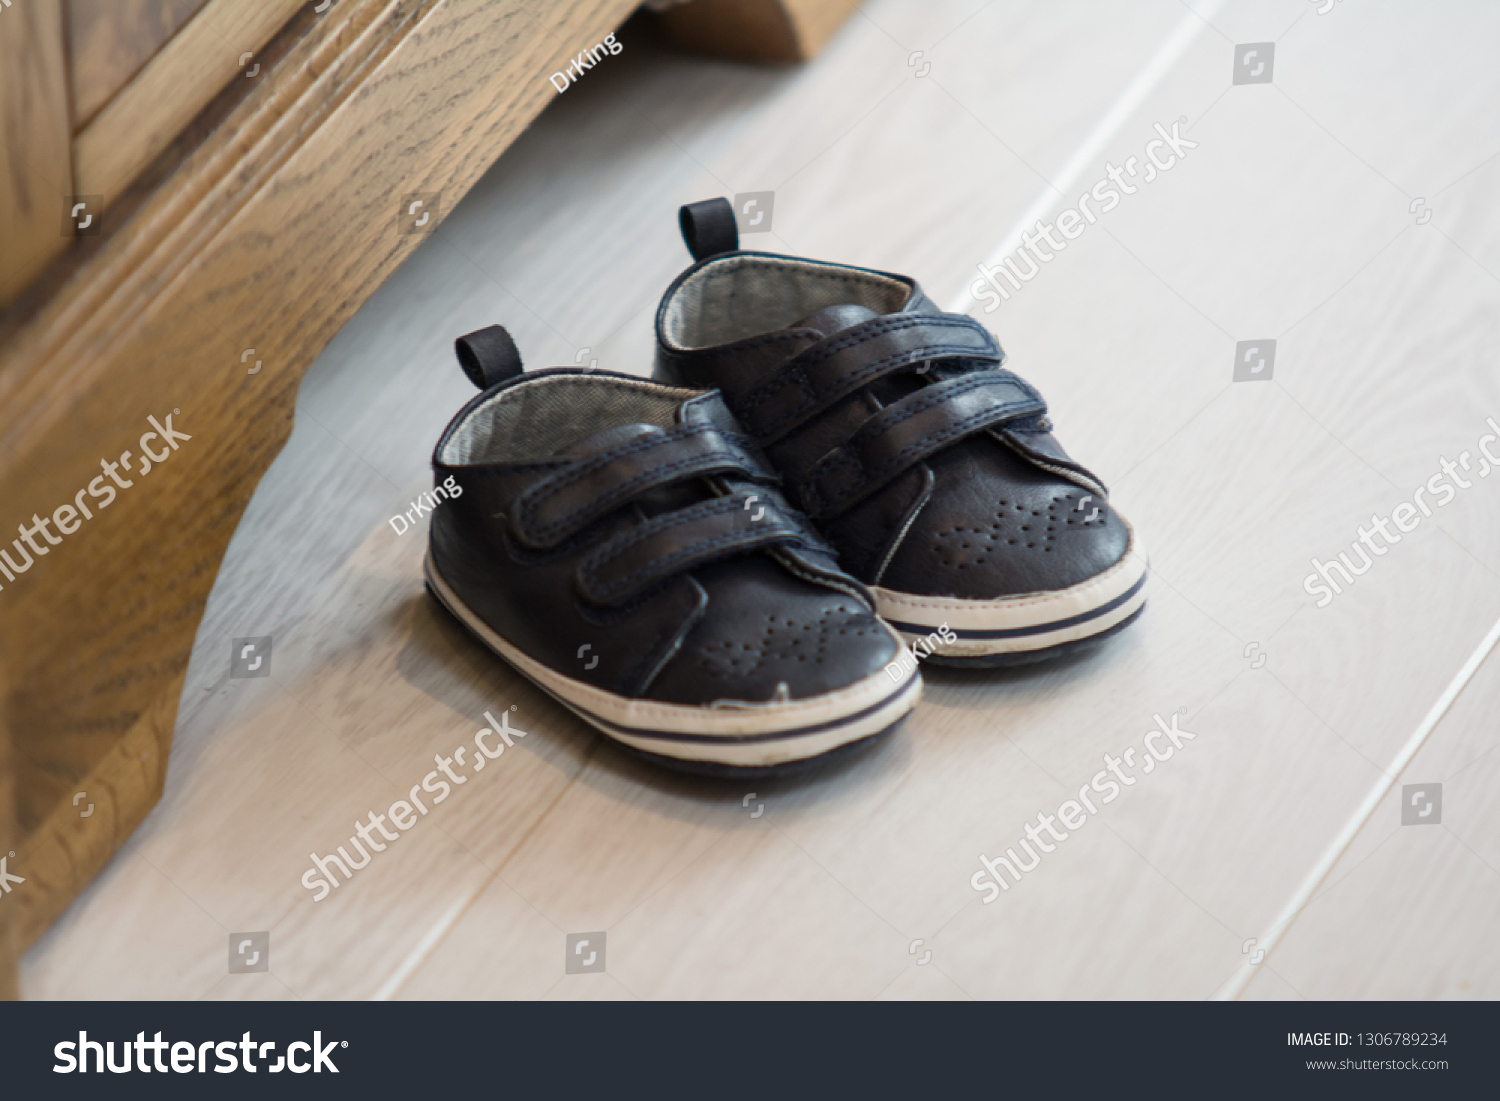 cute baby boy shoes images